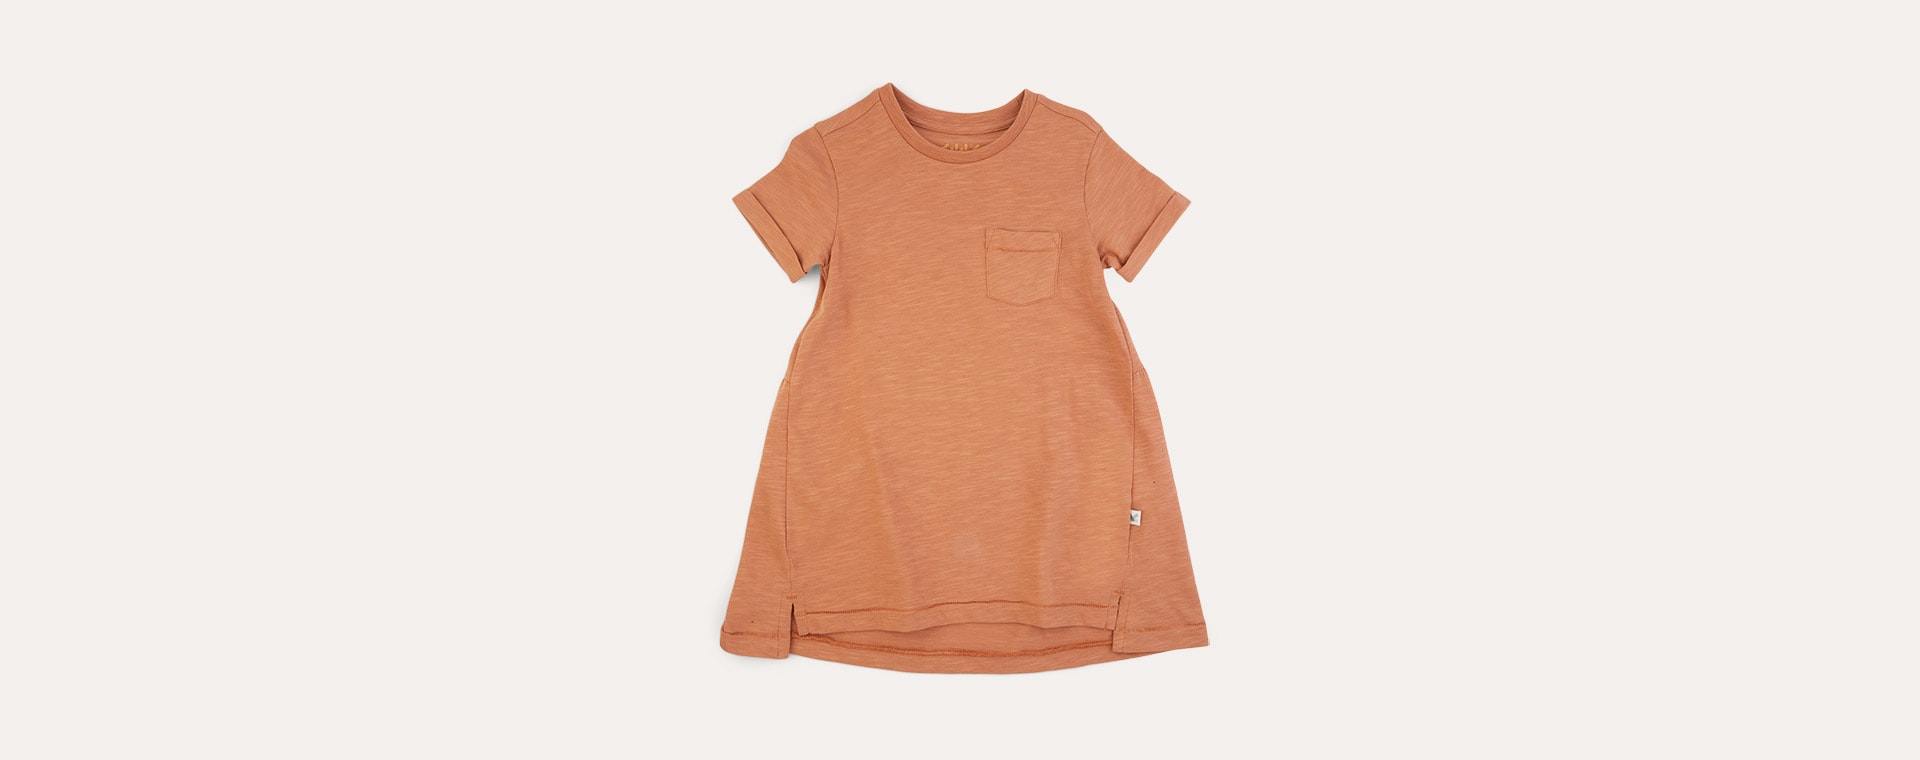 Nut KIDLY Label Perfect Tee Dress